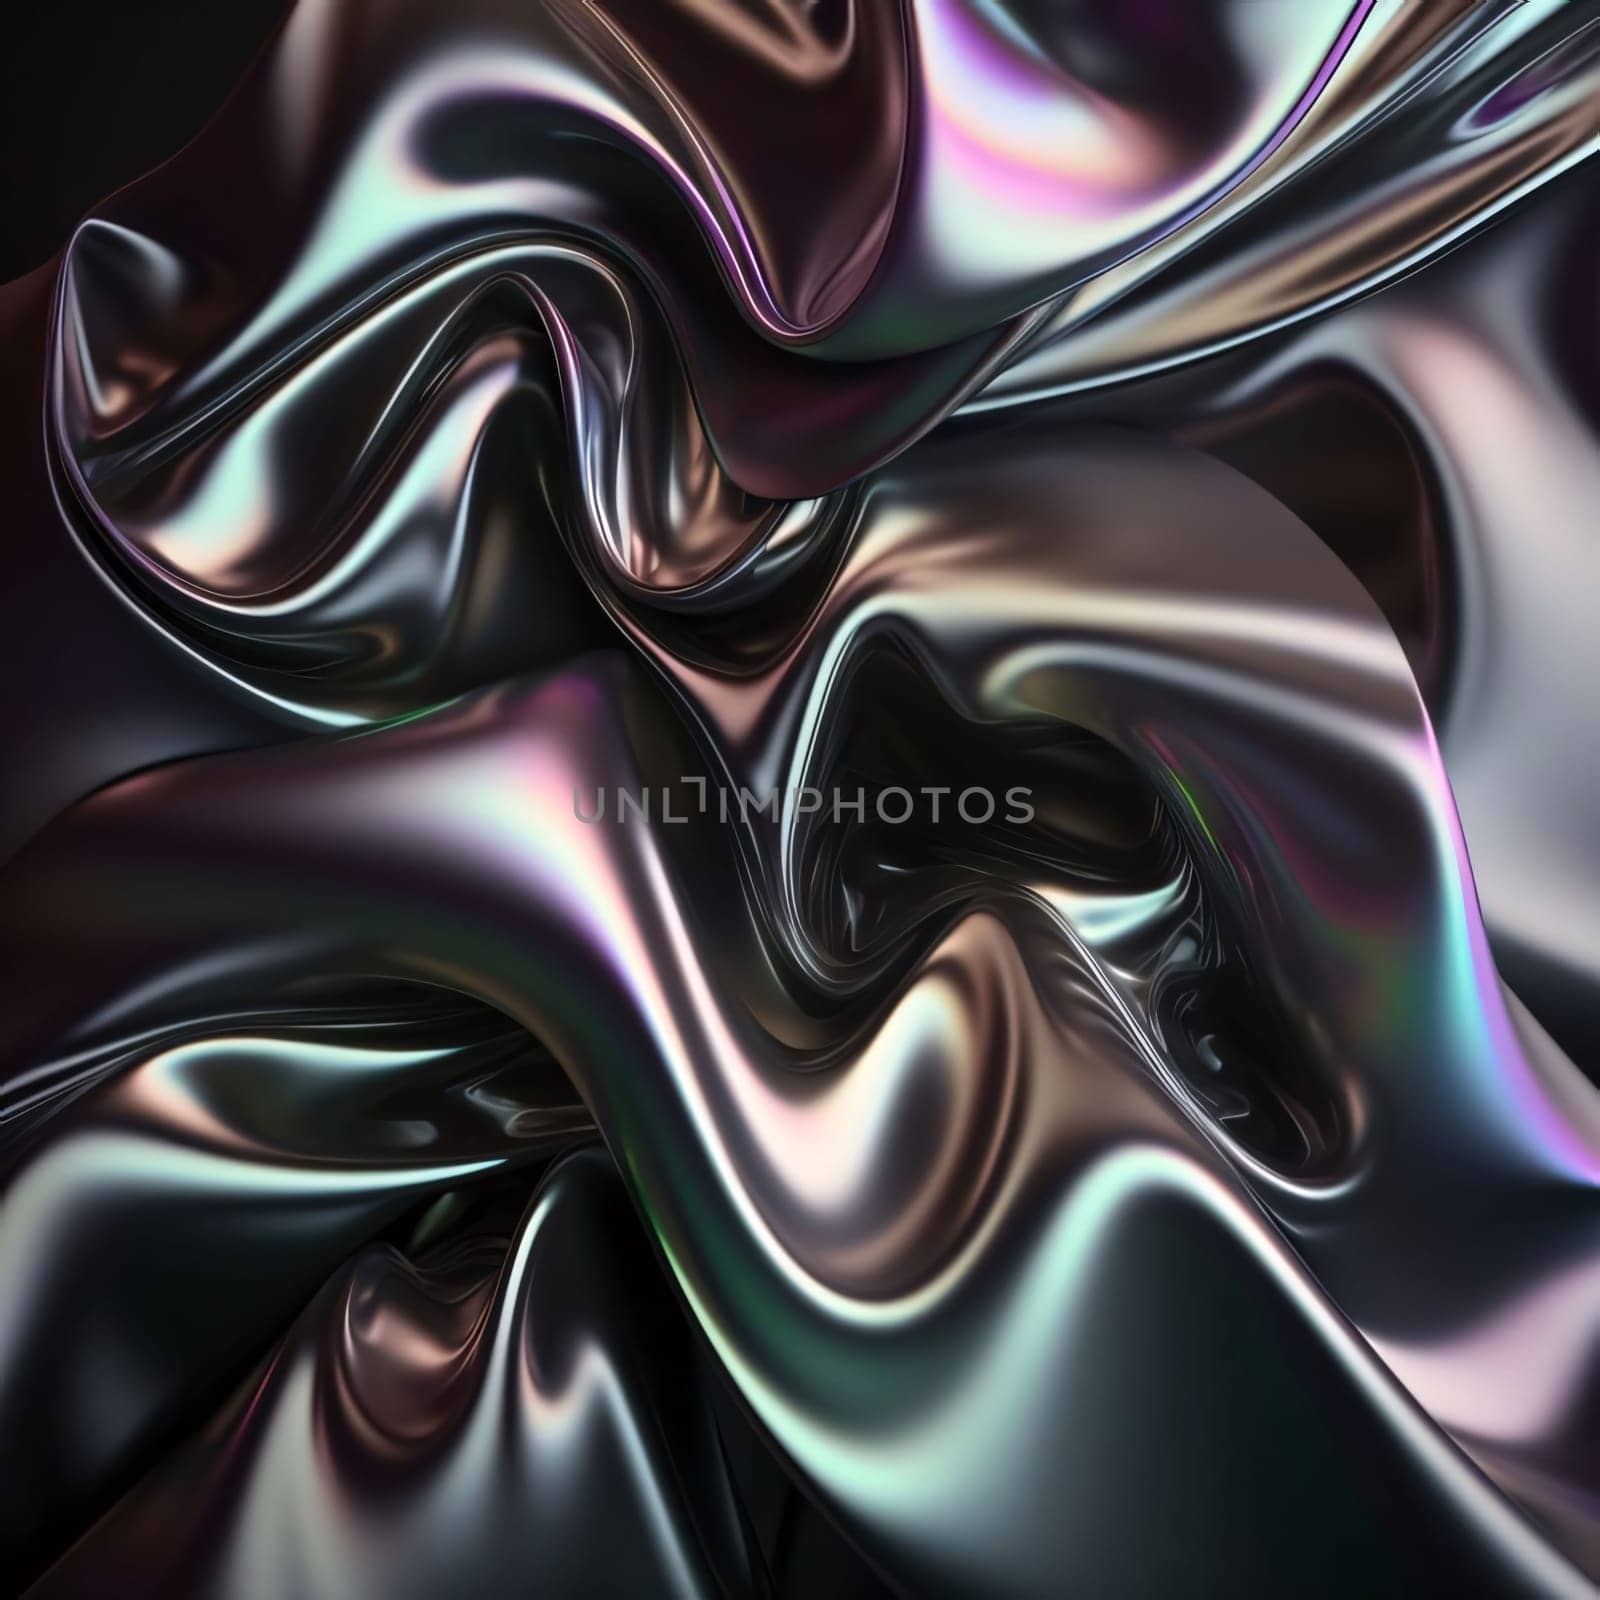 Abstract background design: Abstract metallic background with waves and folds. 3d render illustration.